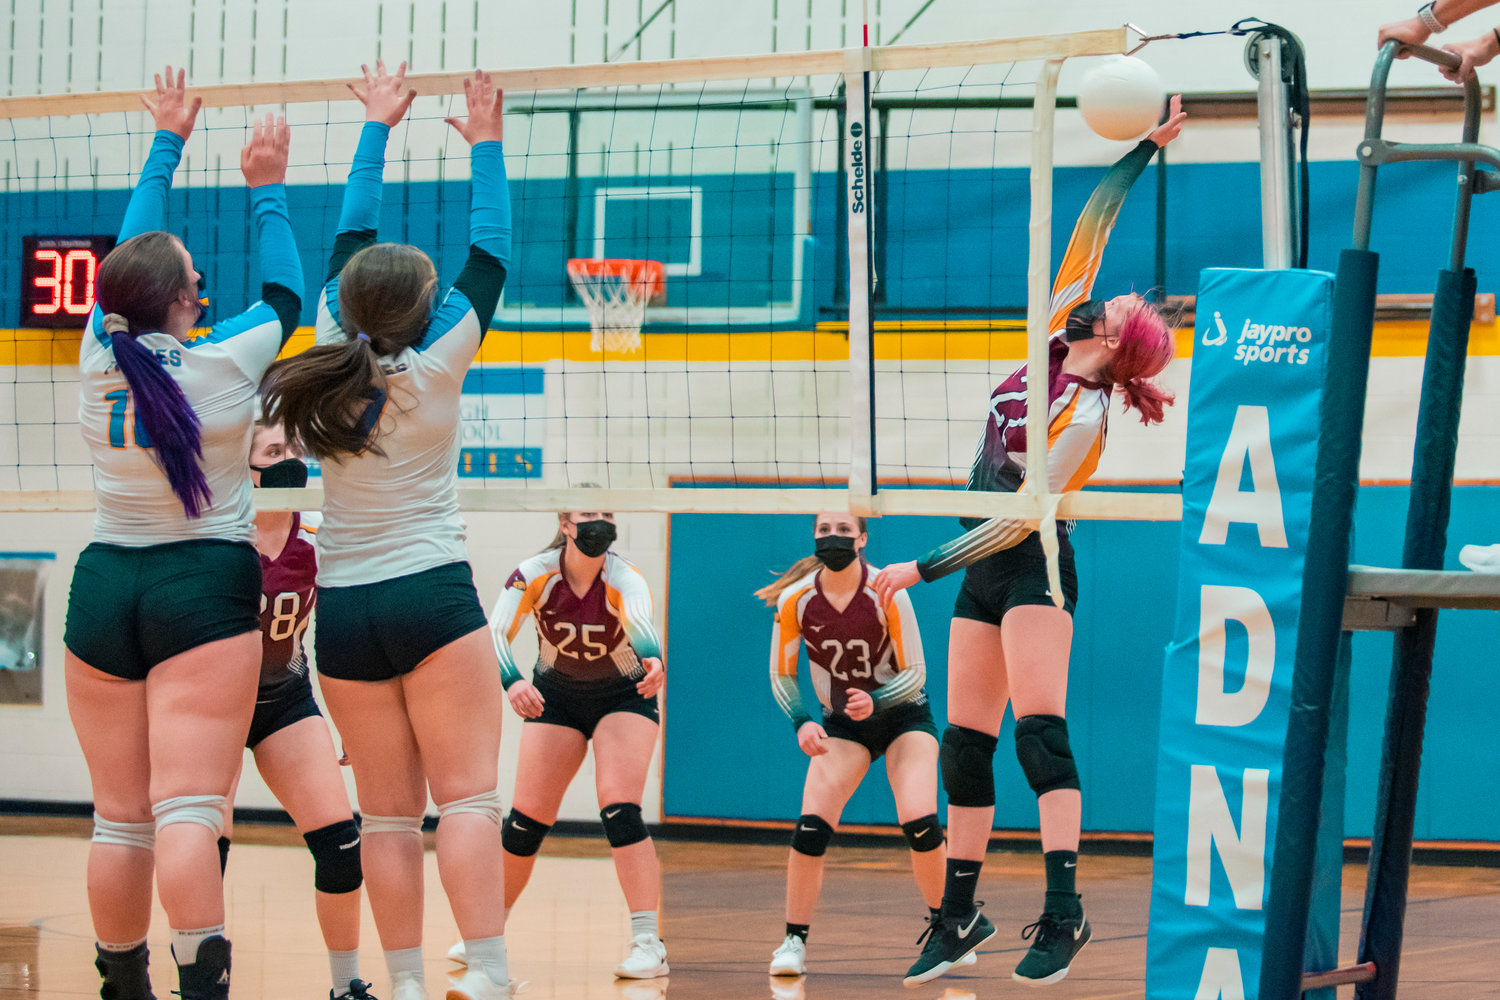 Winlock’s Reagan Lester (22) hits the ball over the net during a game against Adna on Wednesday.